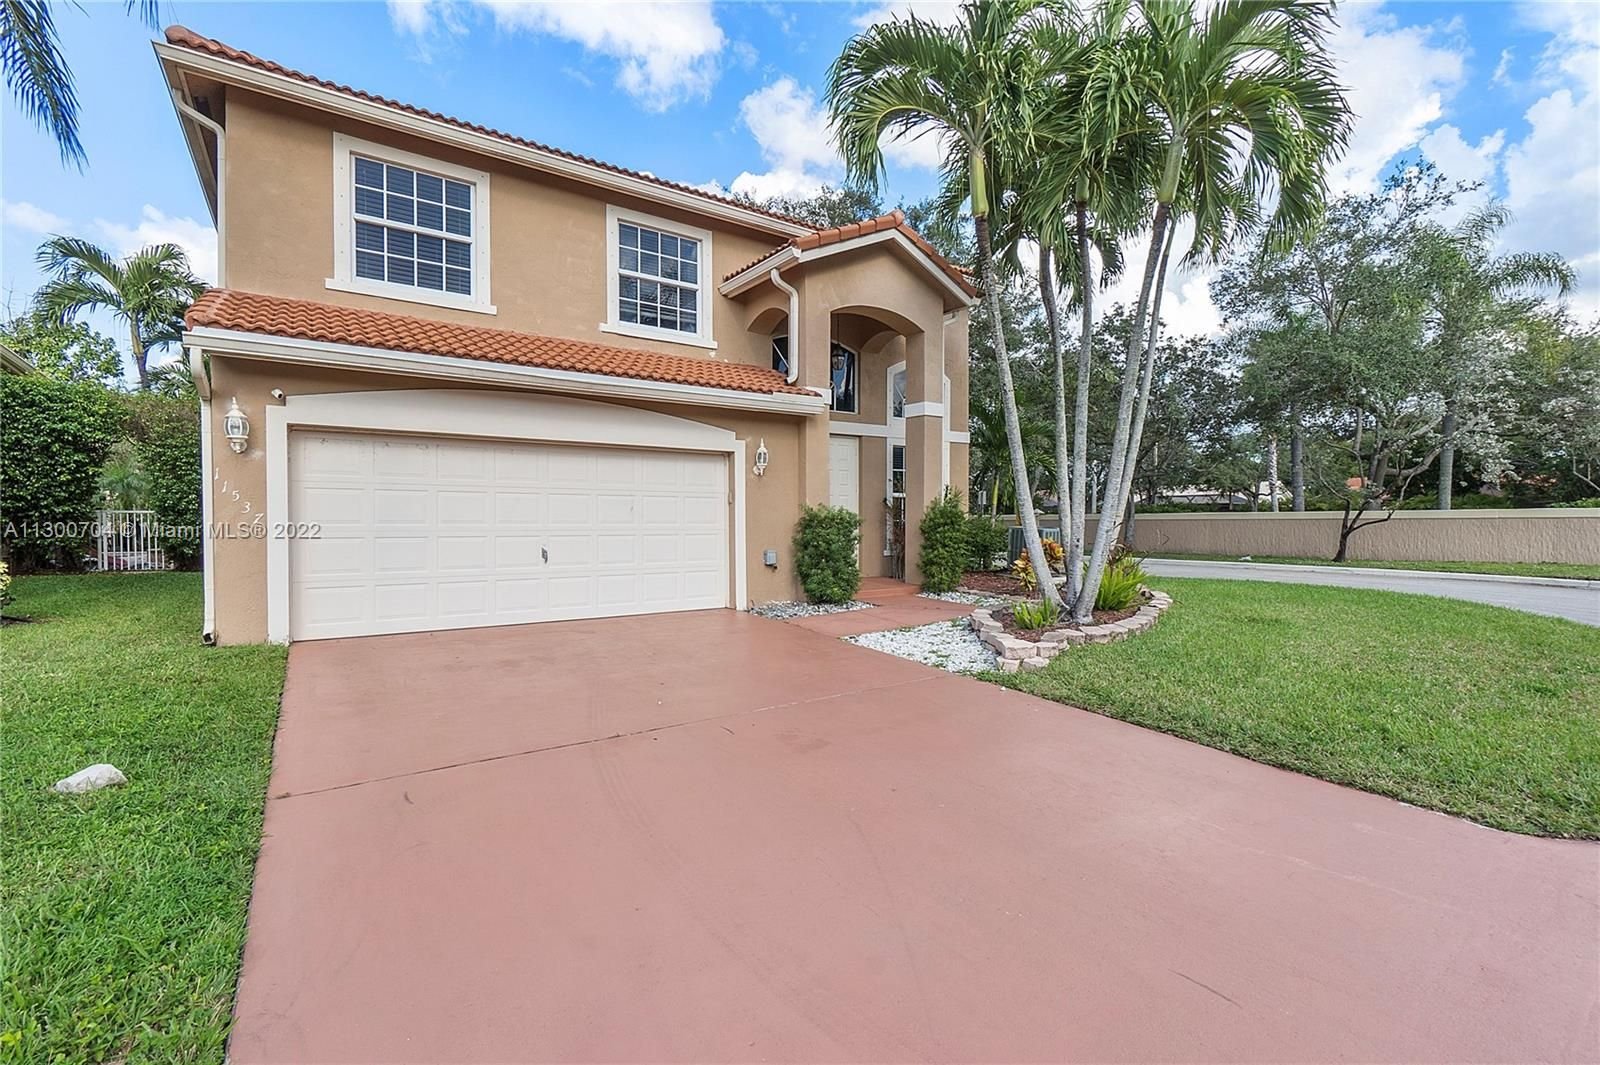 Real estate property located at 11537 3rd Pl, Broward County, Coral Springs, FL